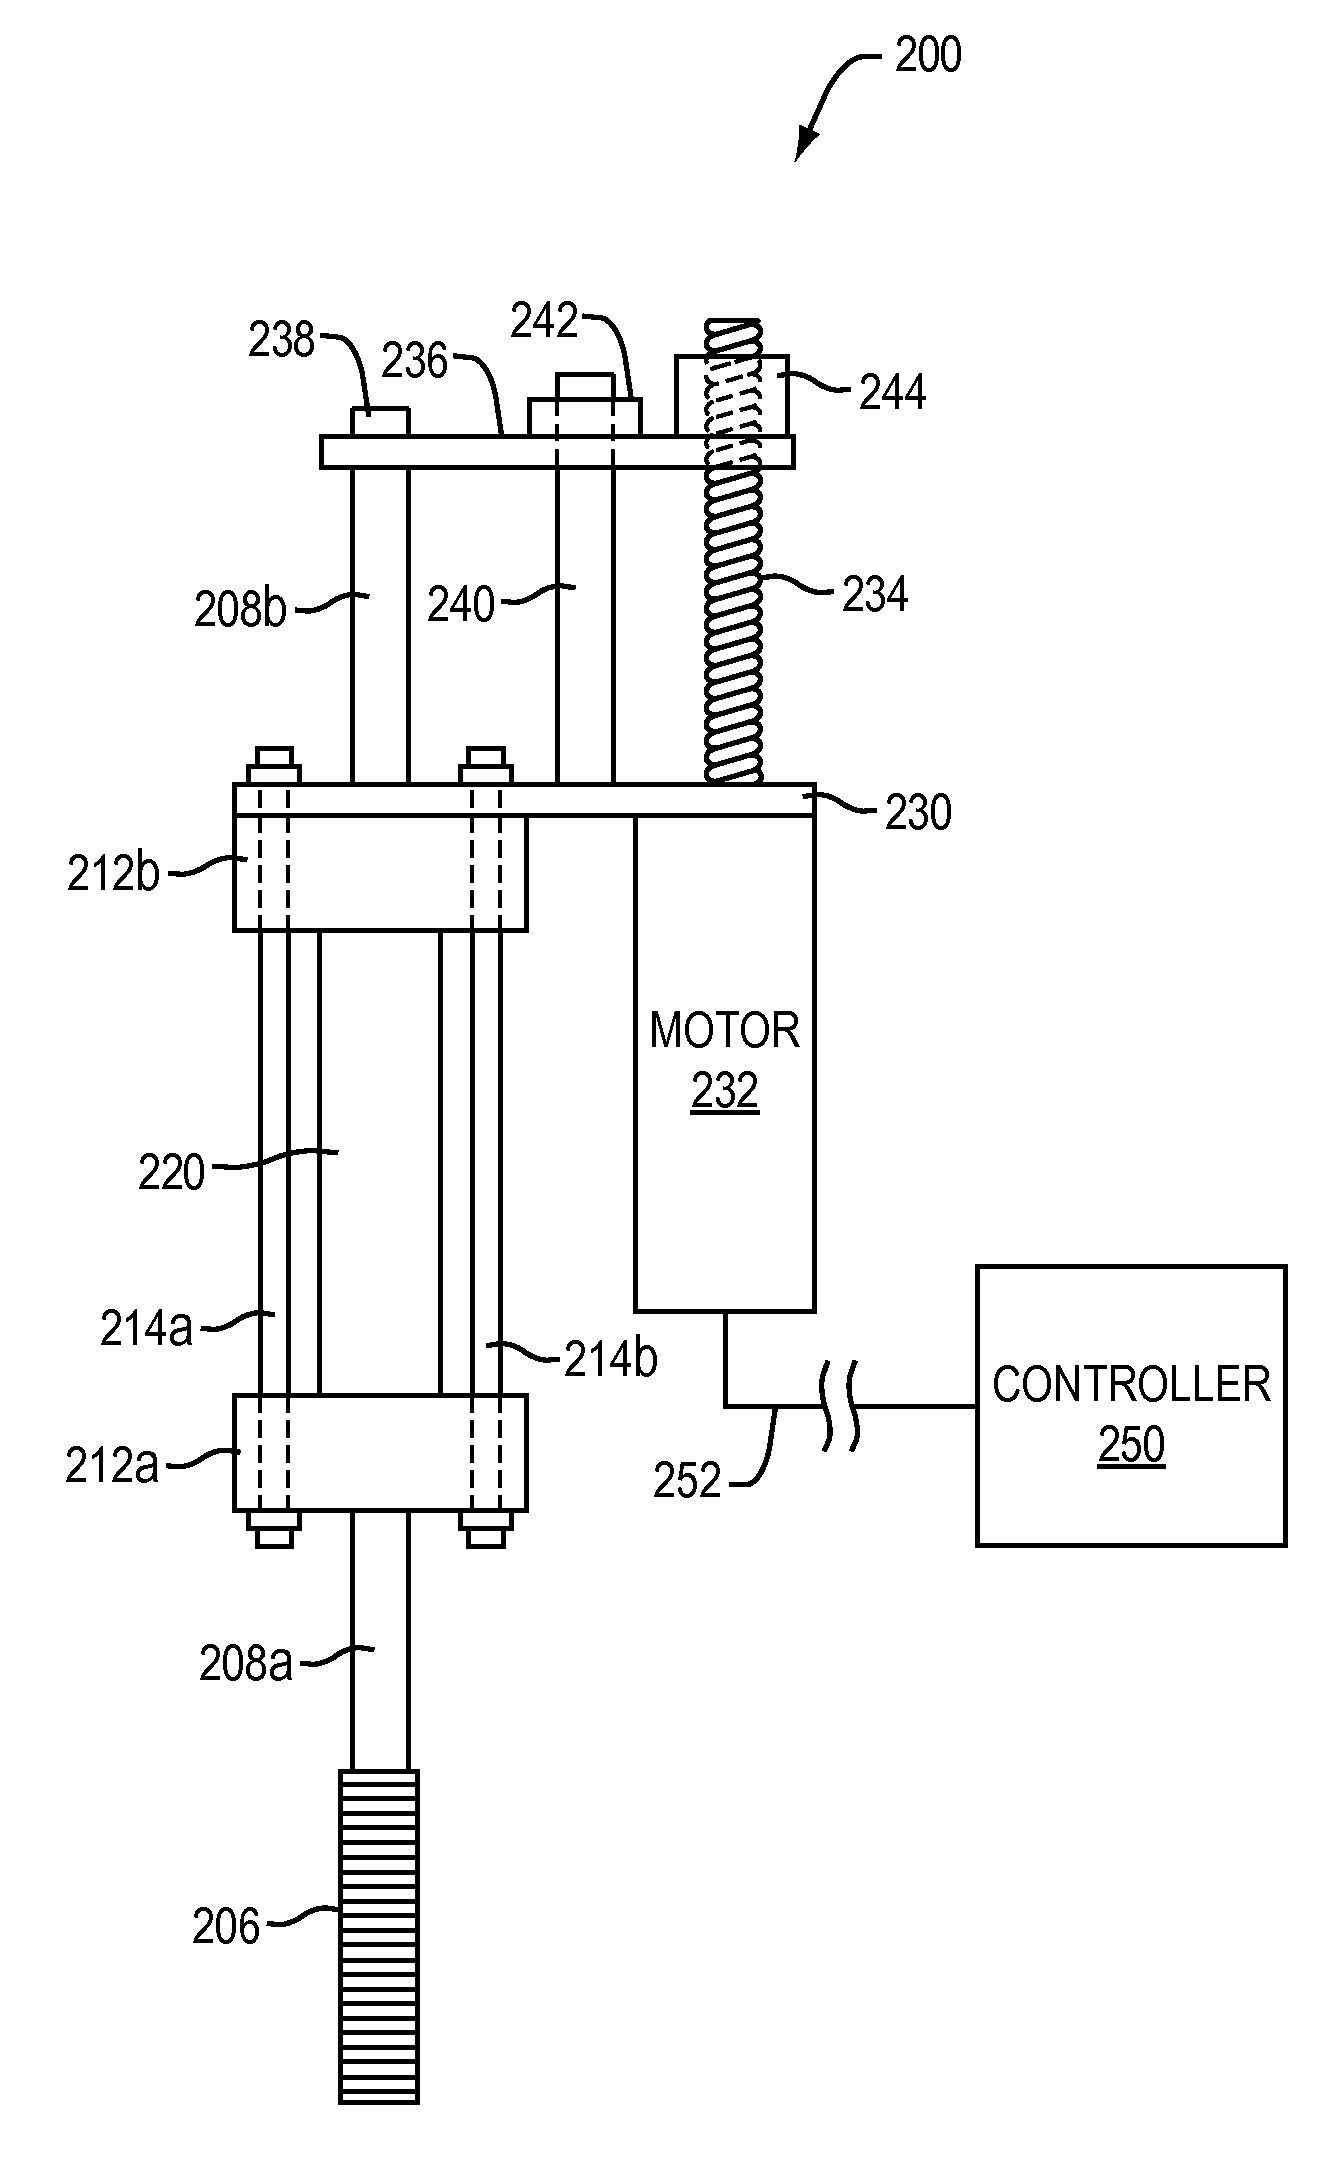 Electronic Retrofit Controller for Hydraulically Adjusted Printing Press